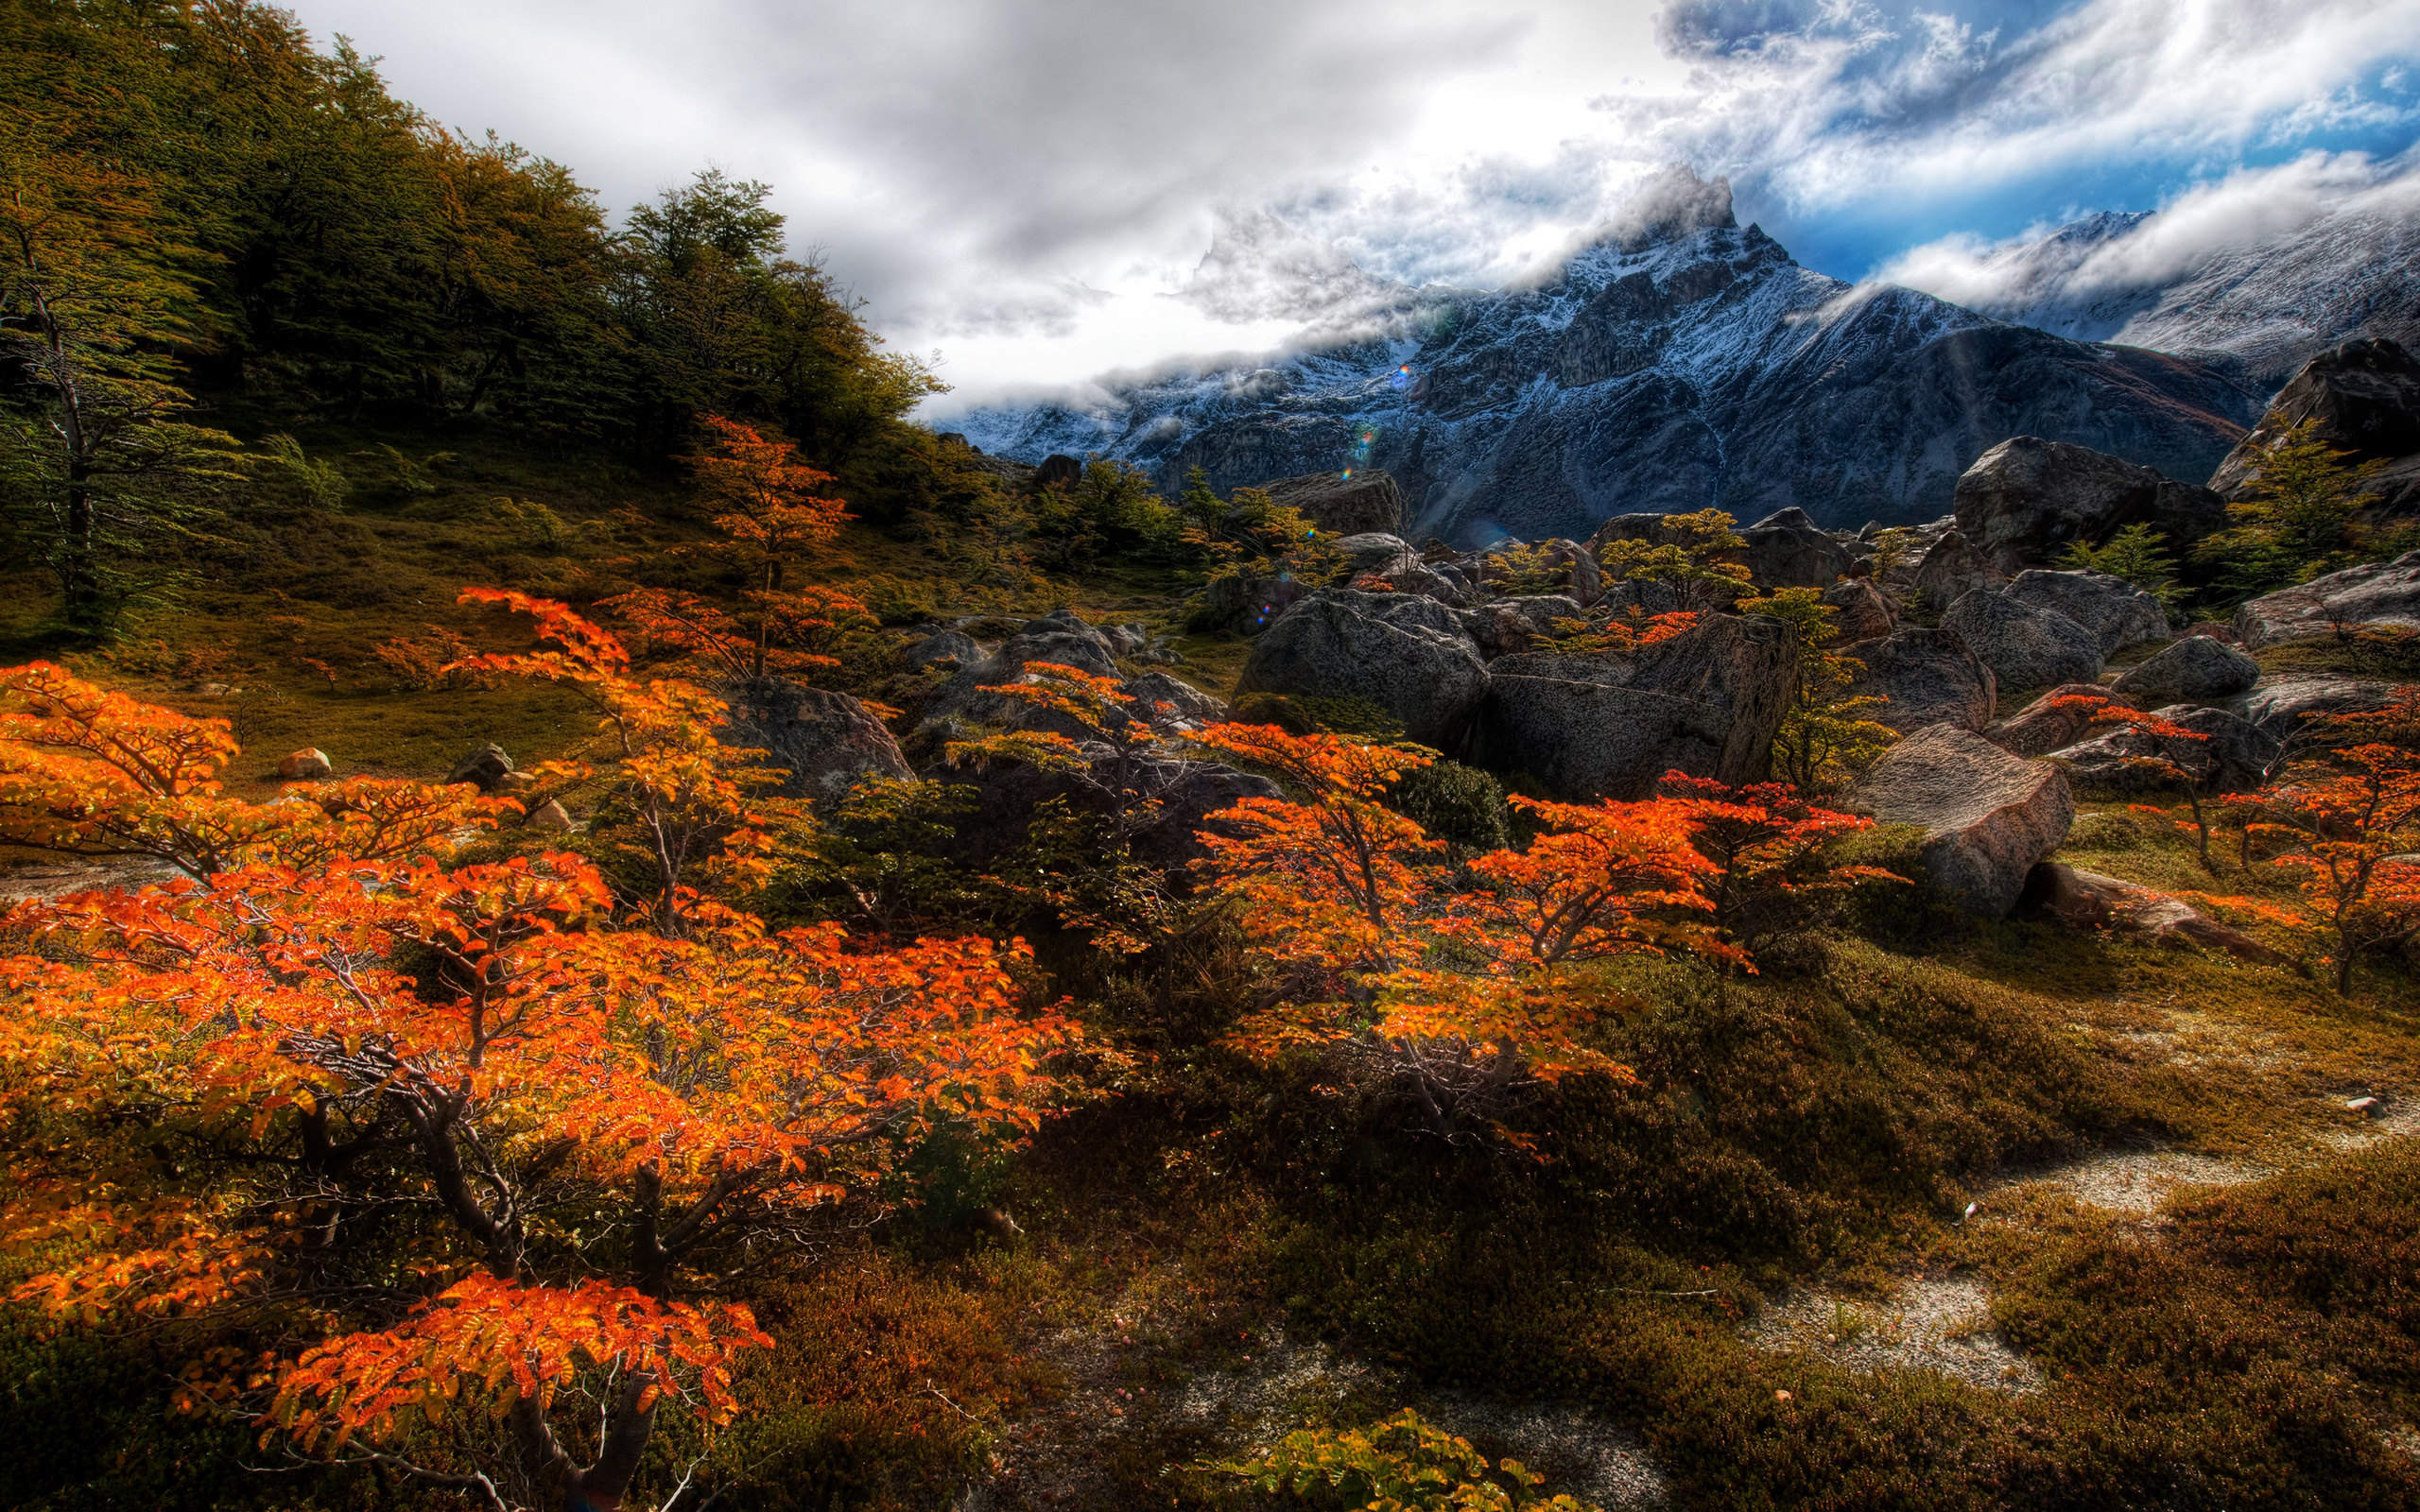 Download Wallpaper autumn mountains clouds patagonia argentina (2560x1600). The Wallpaper, photo